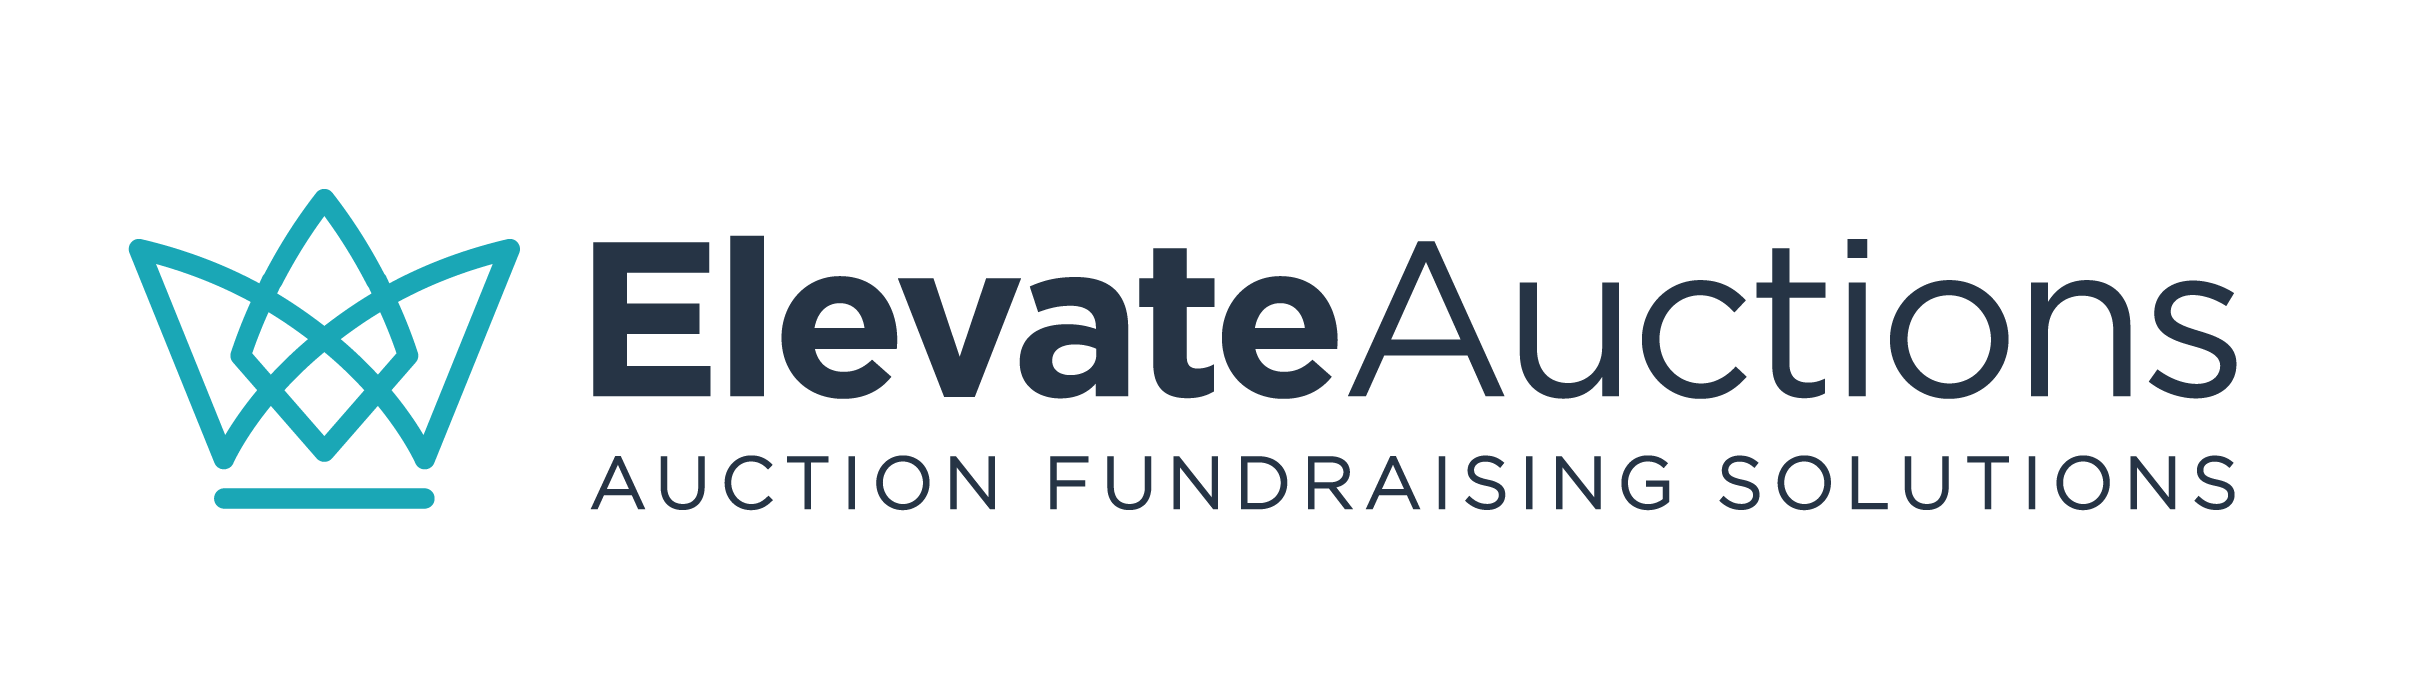 Elevate Auctions